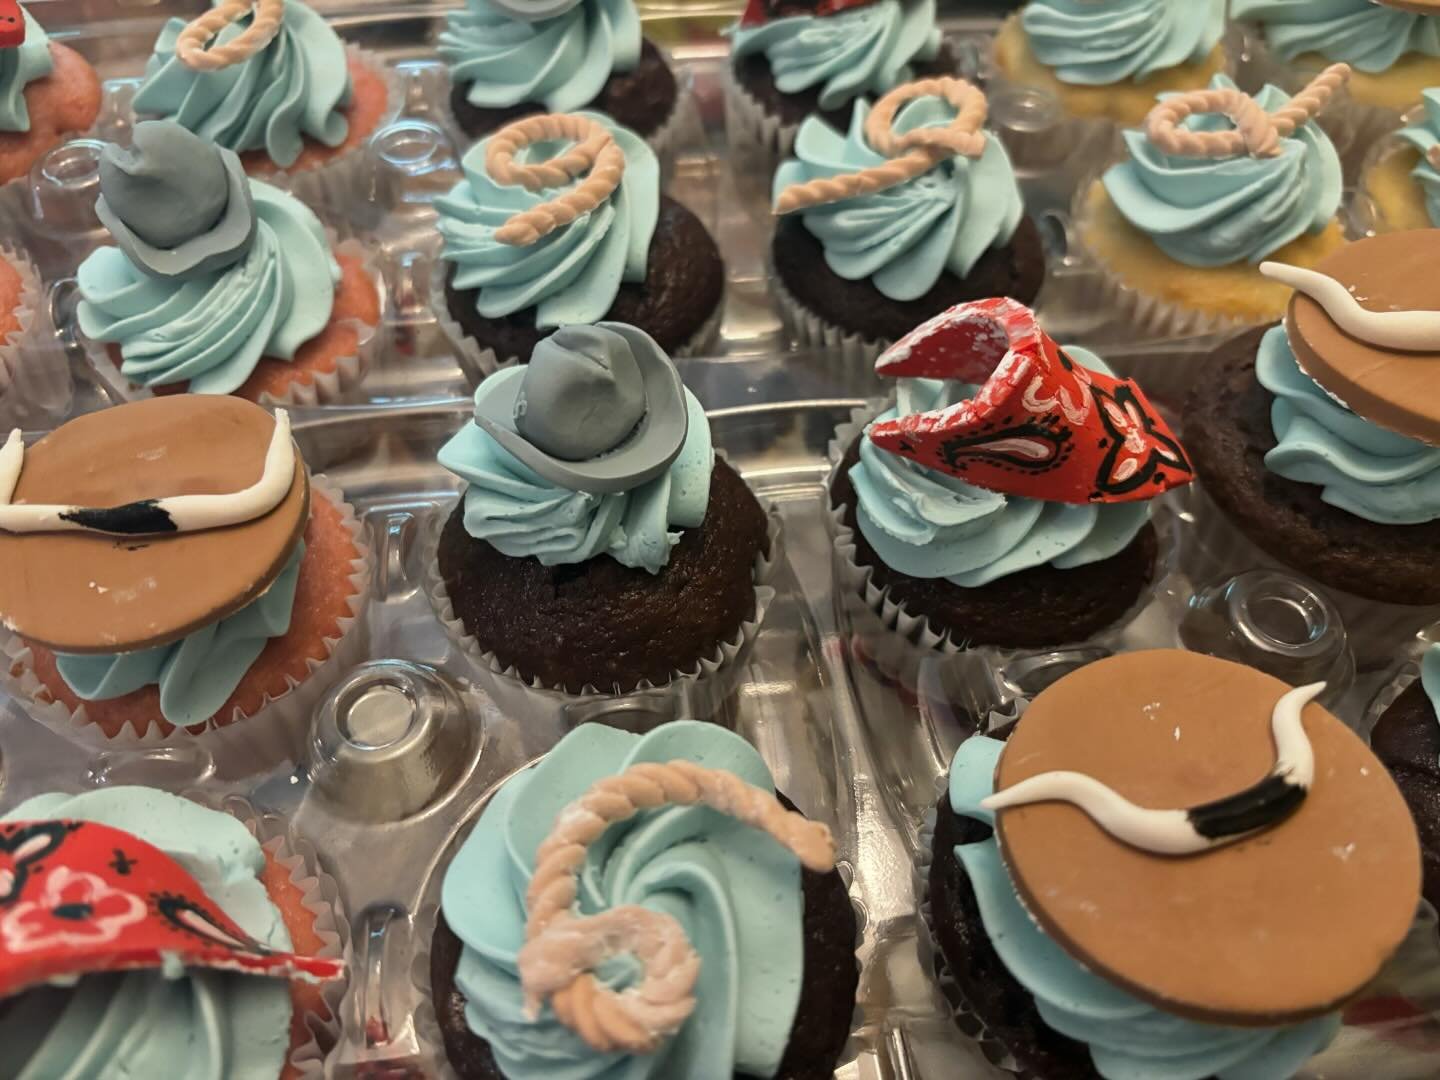 Cowboy themed cupcakes for a baby shower 
.
.
.
.
.
#babyshower #babycupcakes #cowboybabyshower #customcakes #cupcakesofinstagram #fondantcupcaketoppers #baby #babyboy